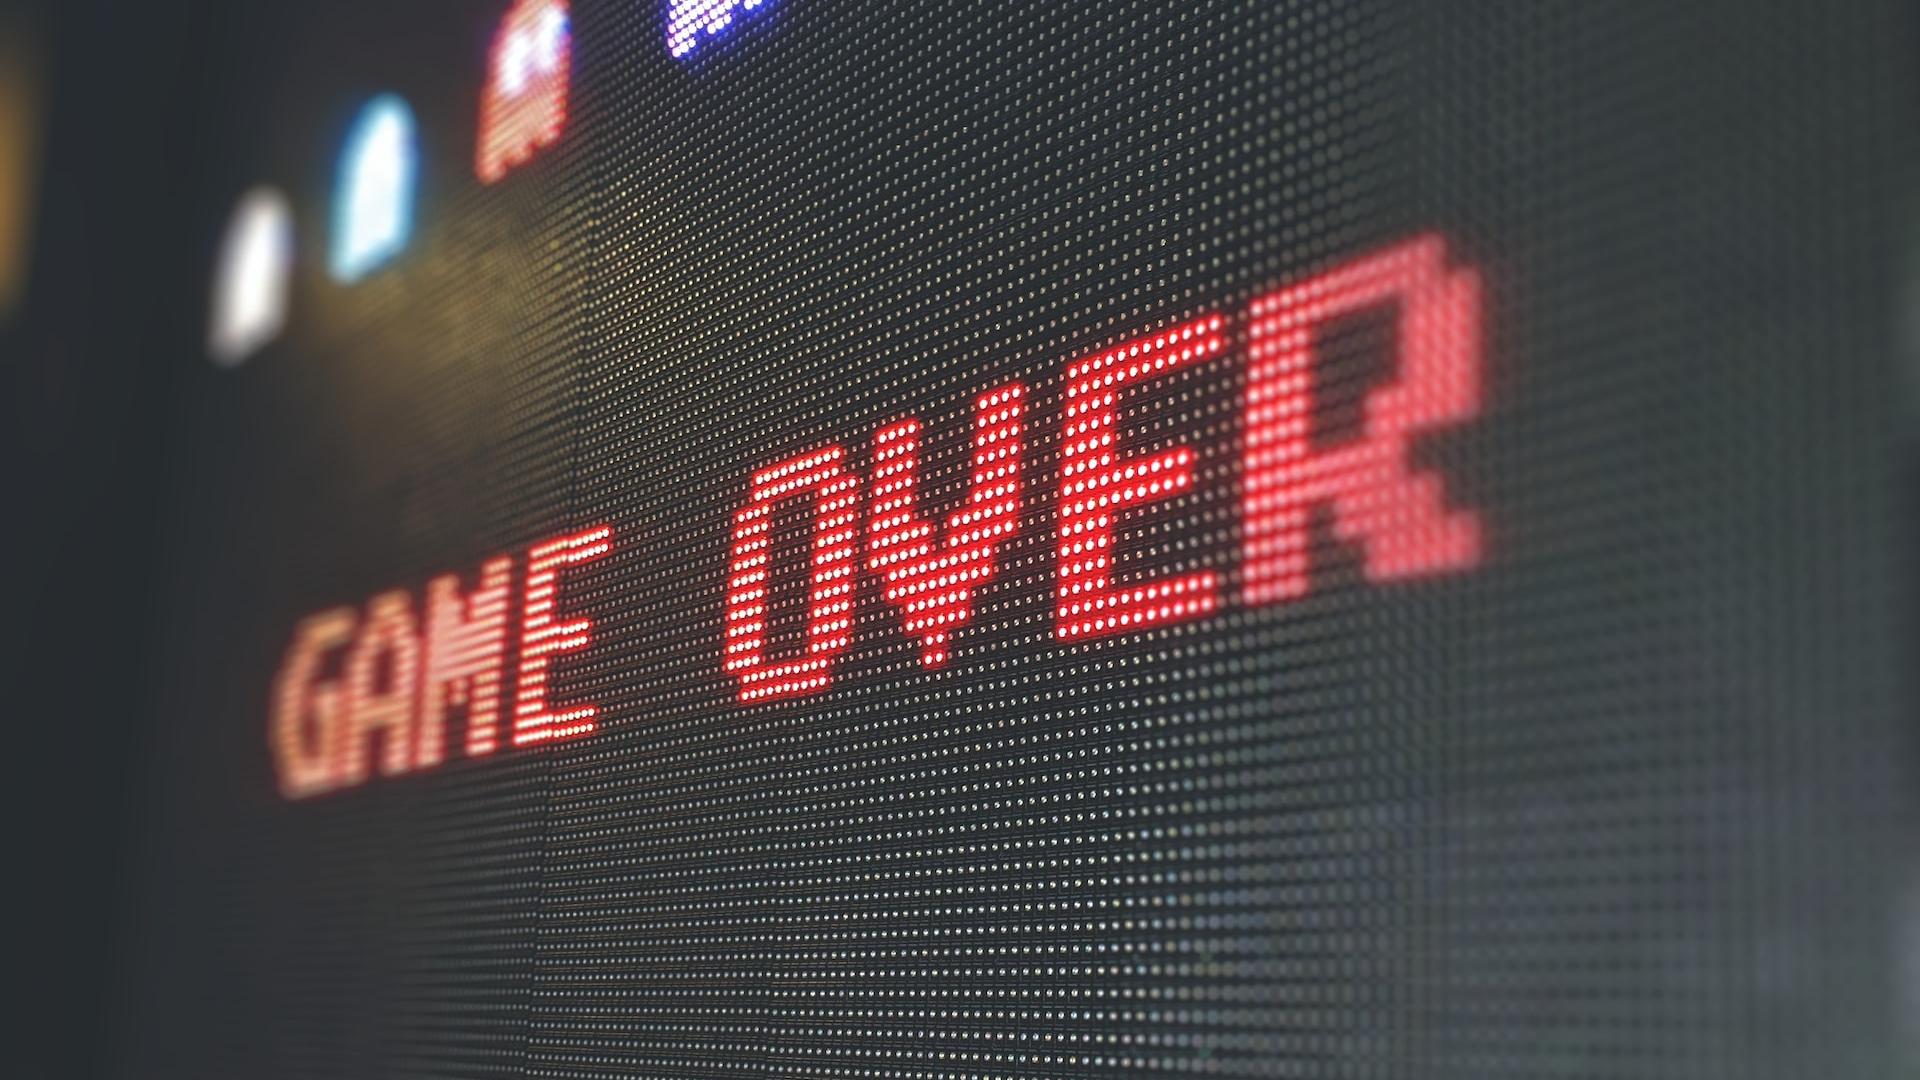 A pacman screen showing game over message